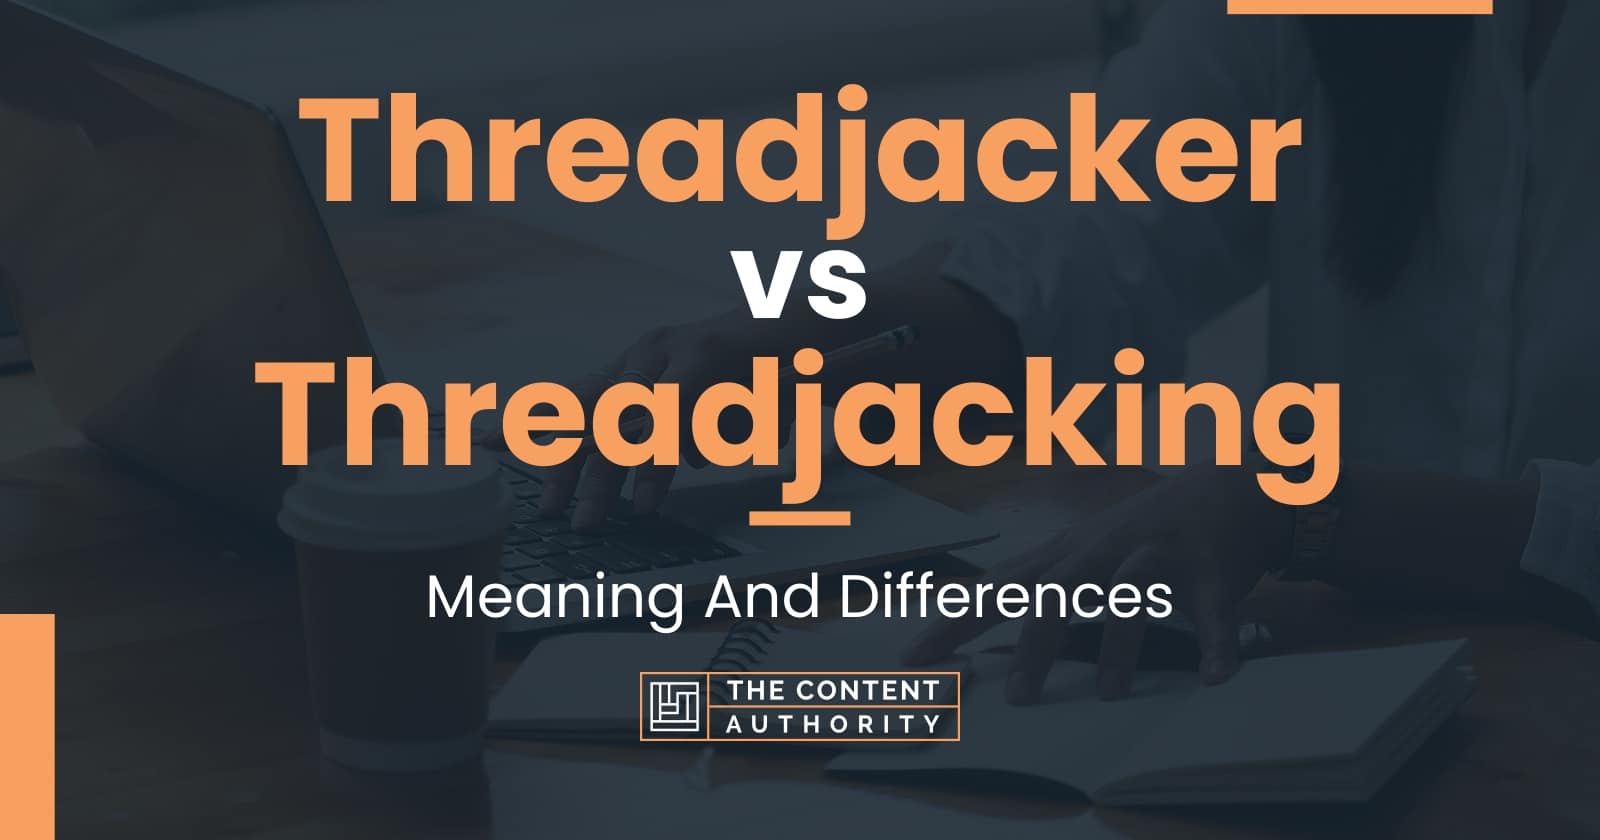 Threadjacker vs Threadjacking: Meaning And Differences